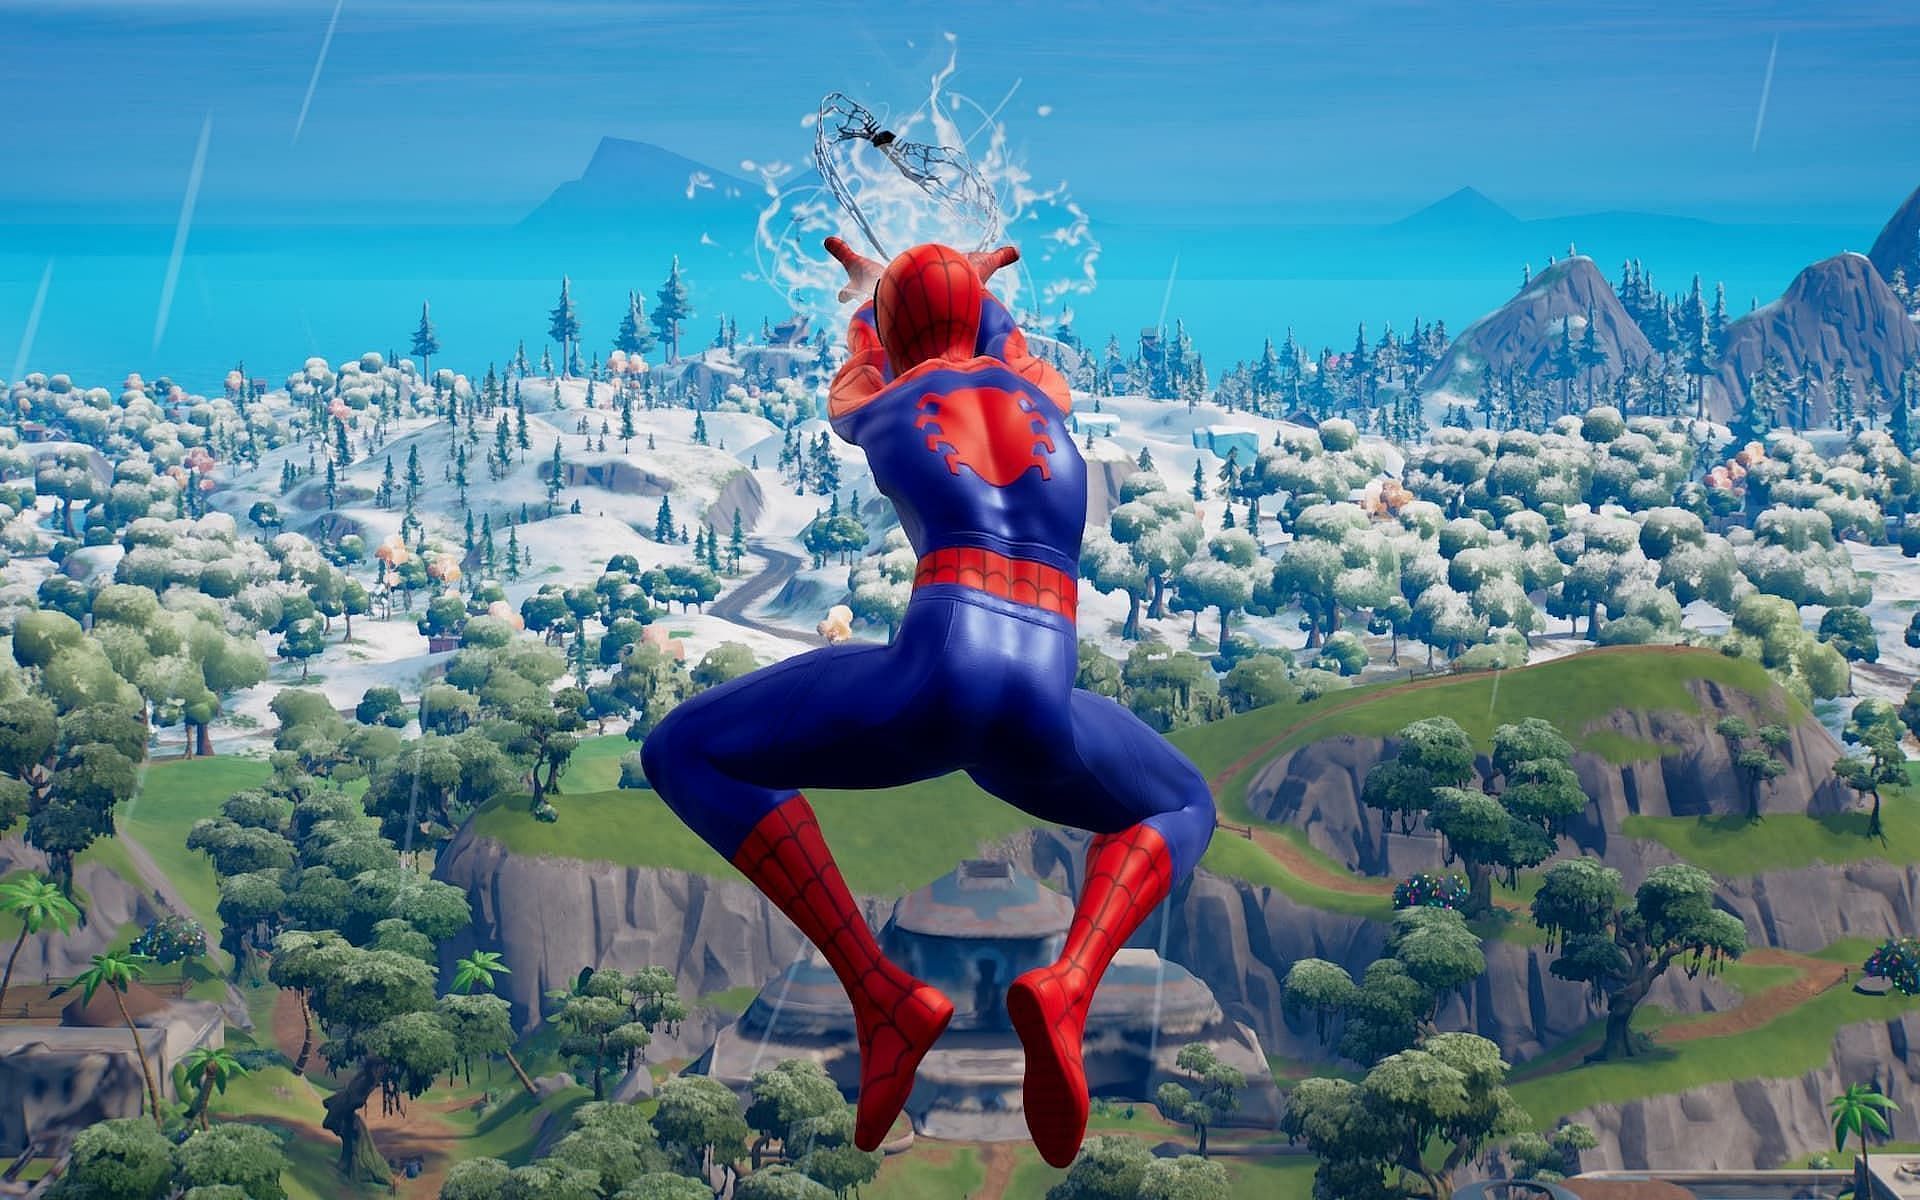 Secret Spider-Man mythic feature in Fortnite Chapter 3 Season 1 (Image via Epic Games)